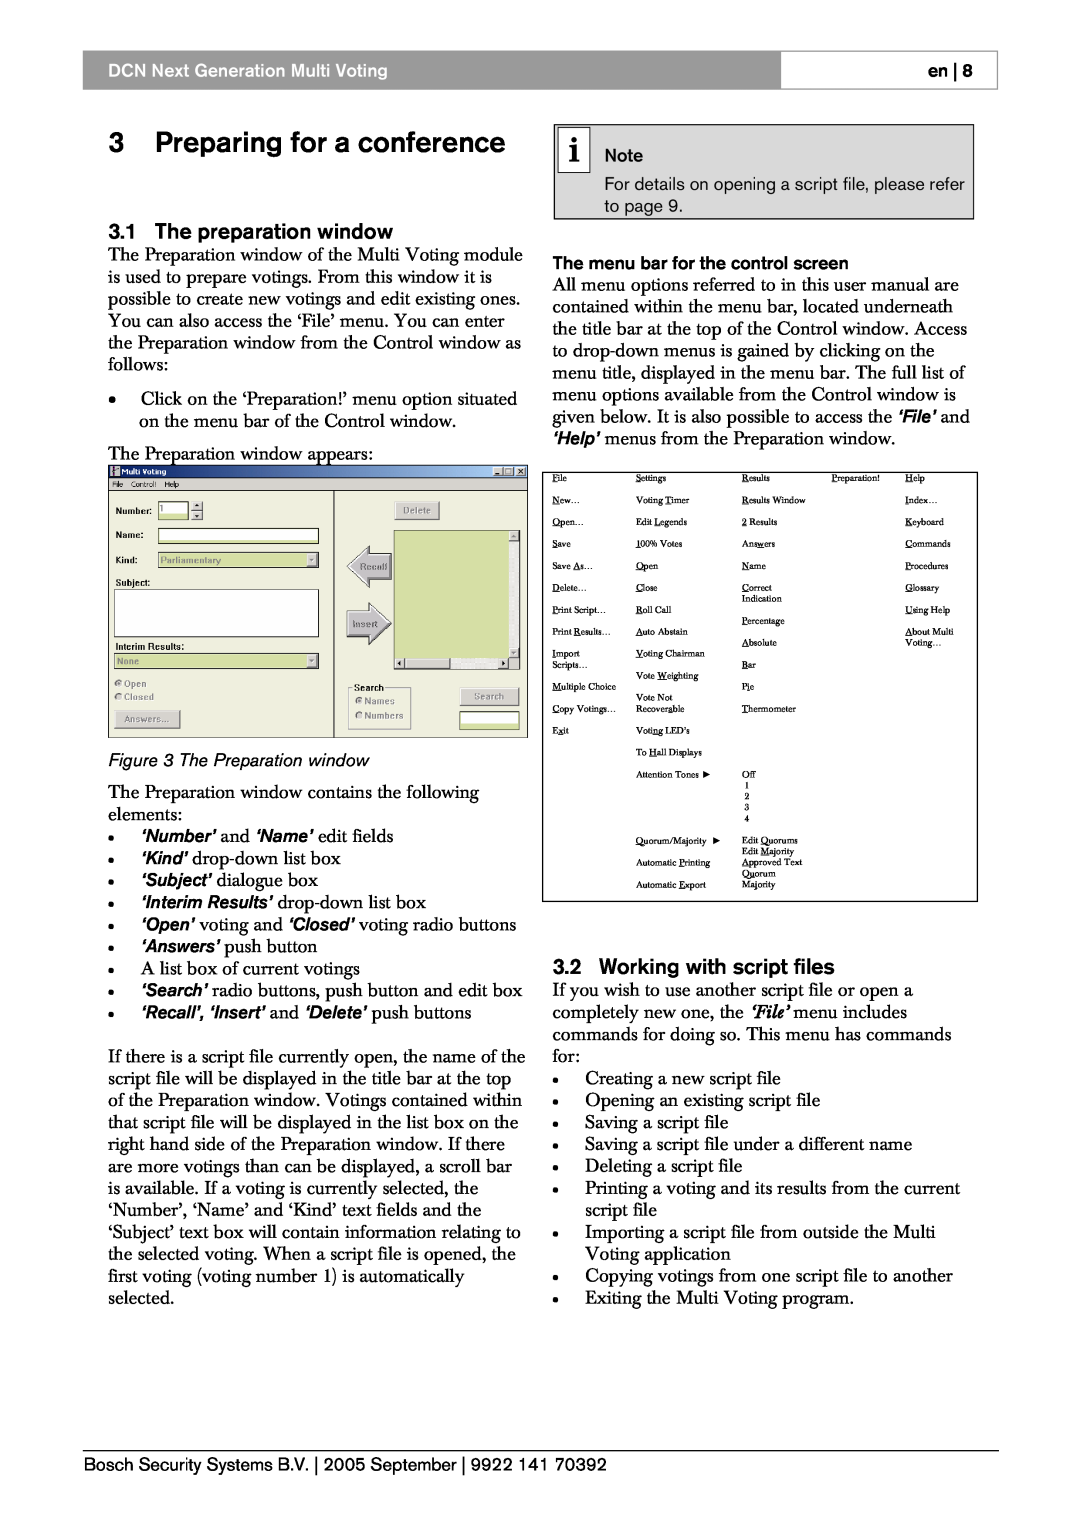 Bosch Appliances LBB 4176 user manual 3Preparing for a conference, The preparation window, Working with script files 